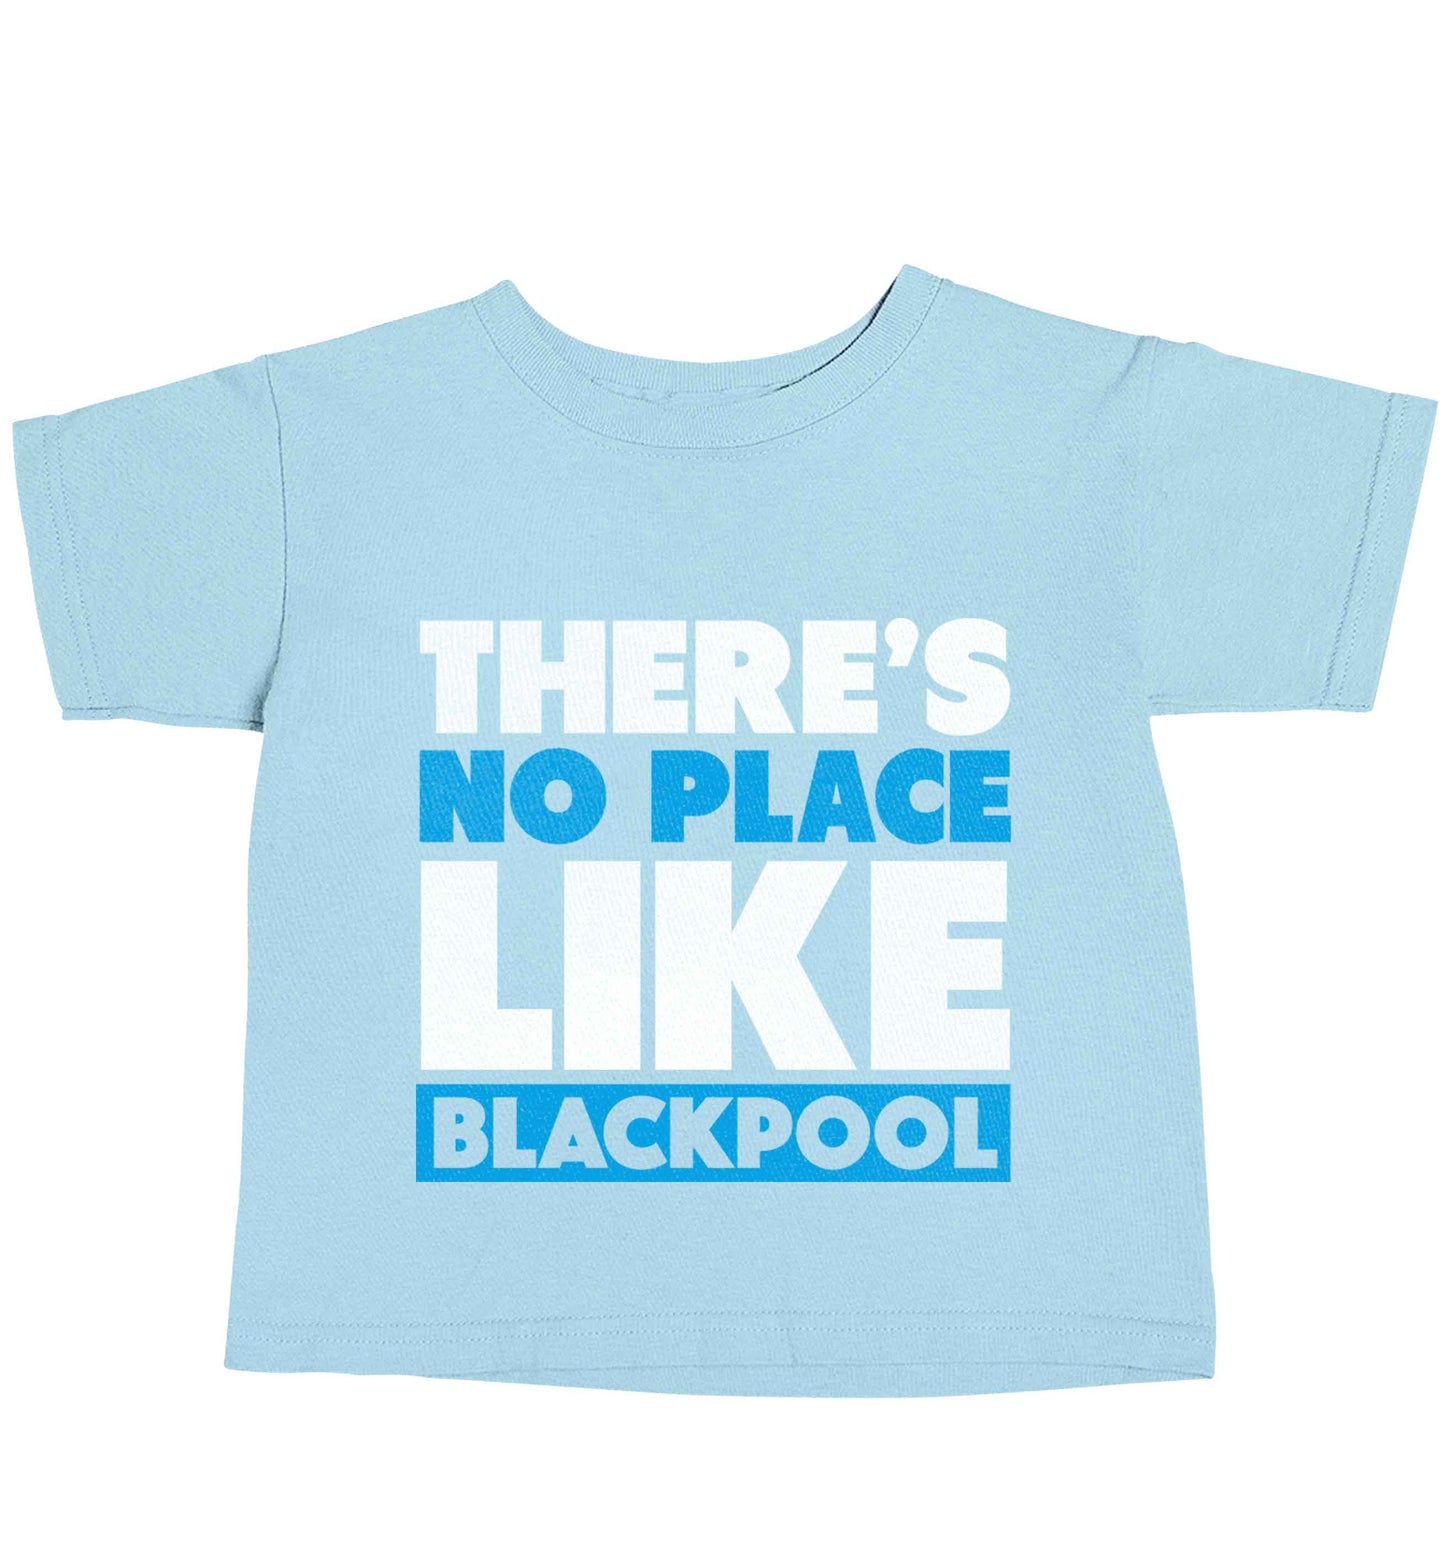 There's no place like Blackpool light blue baby toddler Tshirt 2 Years